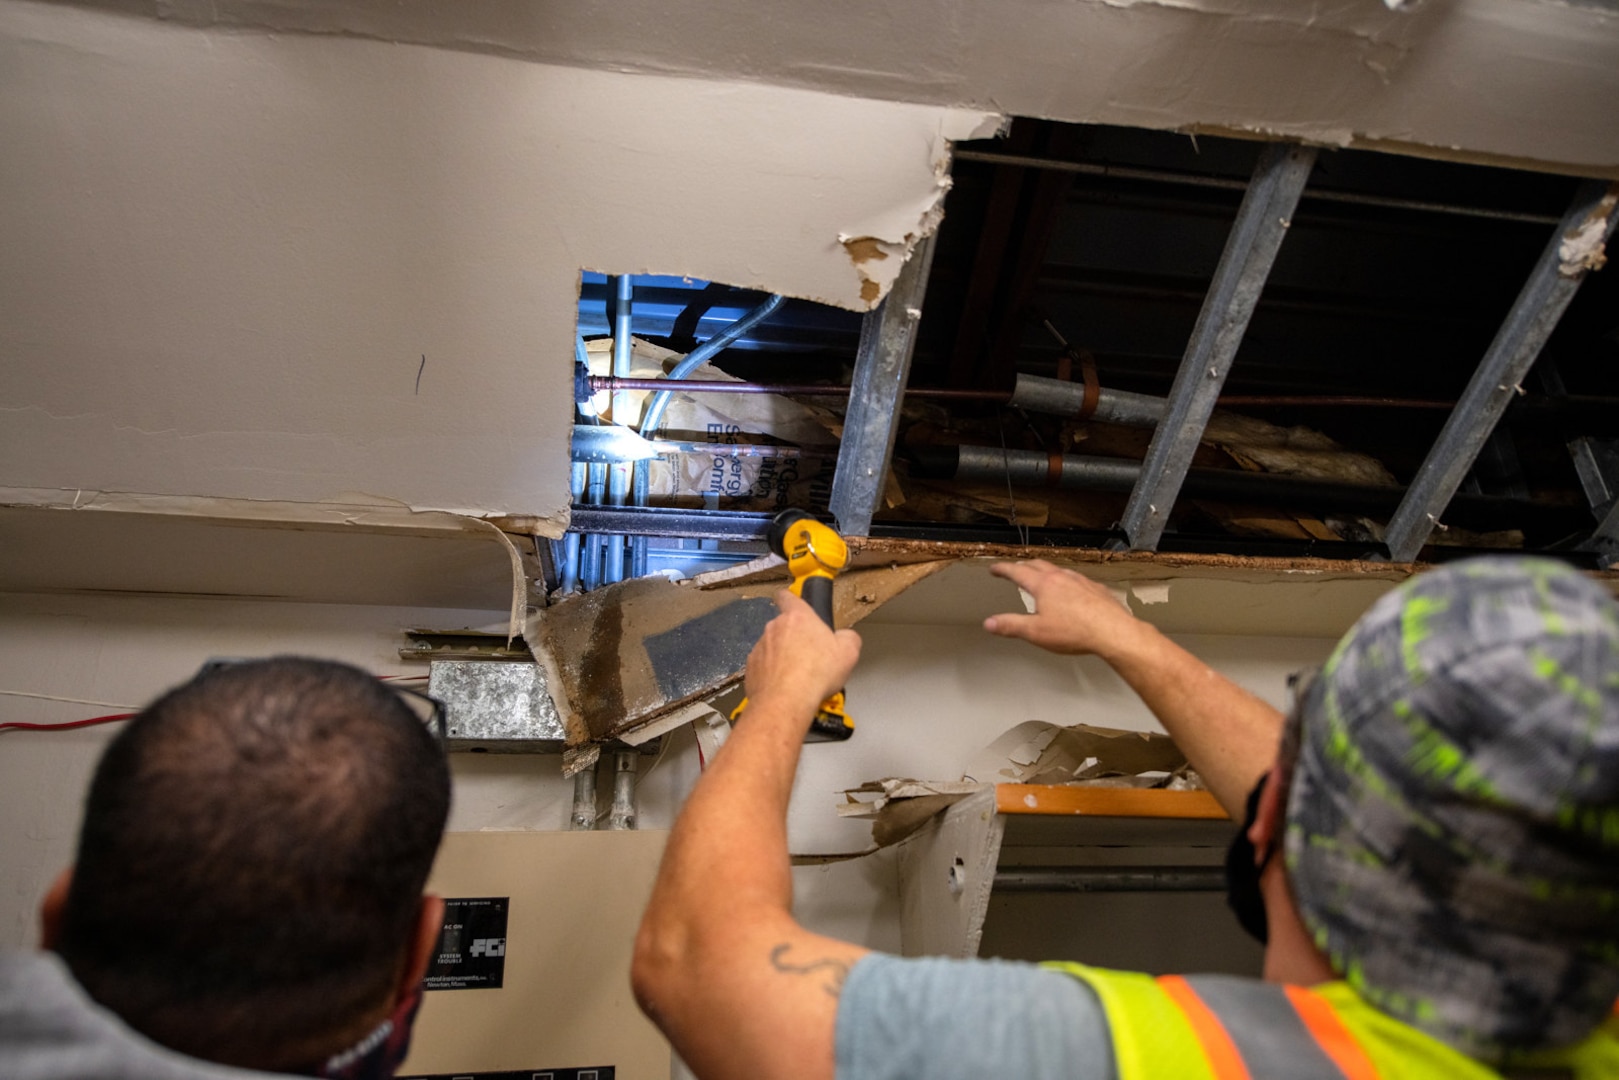 Michael Wergin, right, 502nd Civil Engineer Squadron utilities section, and a 502nd CES alarms system specialist, locate a leak in a waterline caused by recent severe winter storms, Feb. 24, 2021, at Joint Base San Antonio-Lackland, Texas.